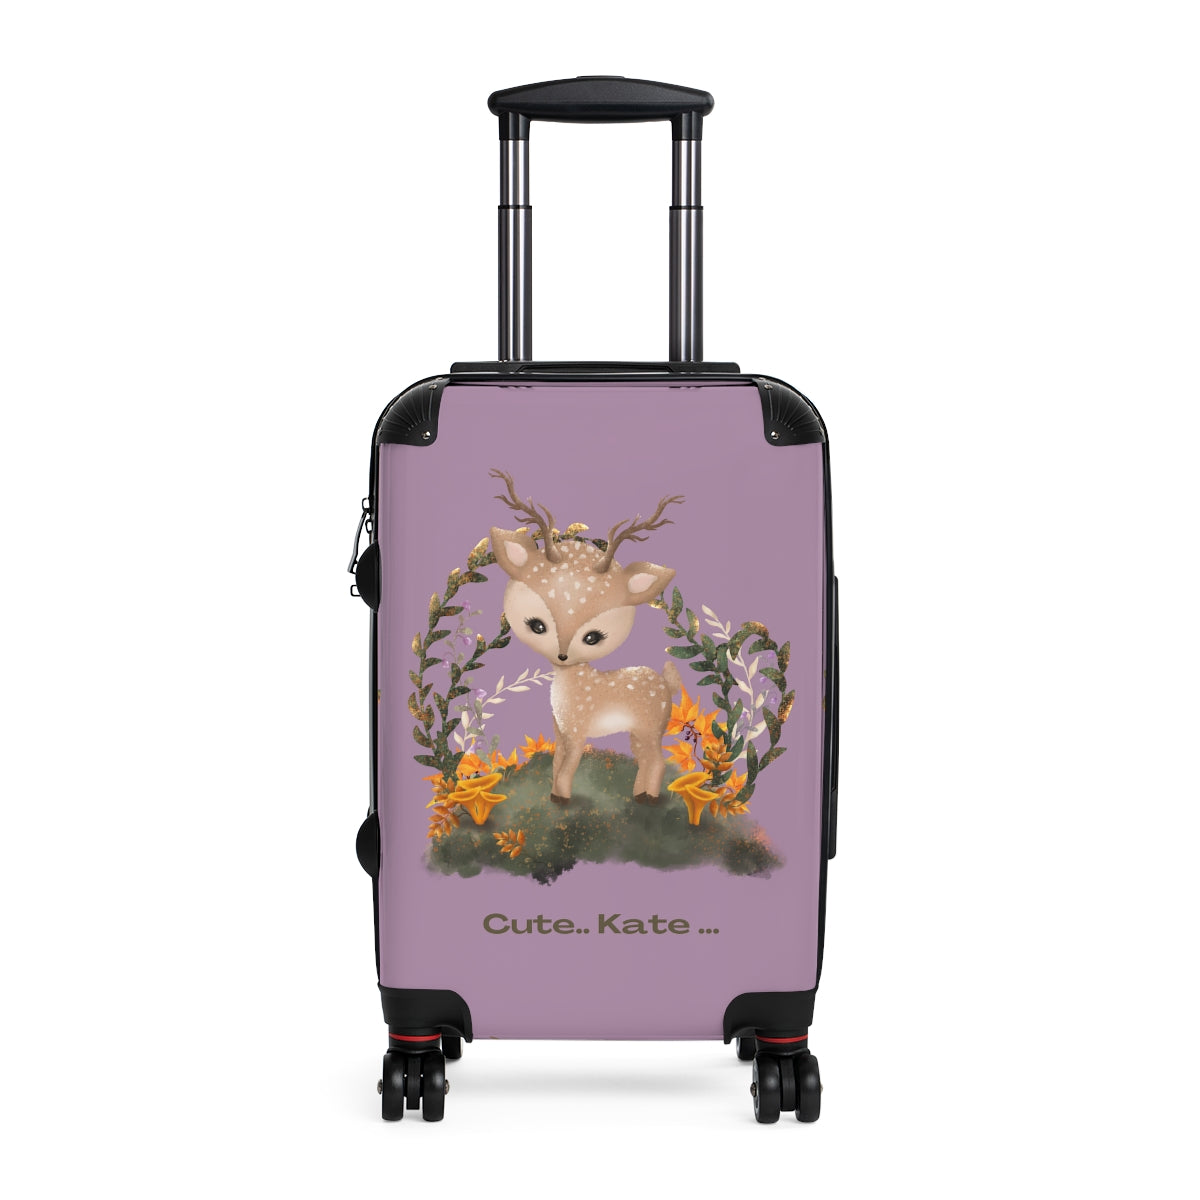 KIDS CARRY-ON Suitcases, Deer Boys Cabin Suitcases, Kids Luggage With Wheels, Spinner, Combination Lock | Artzira